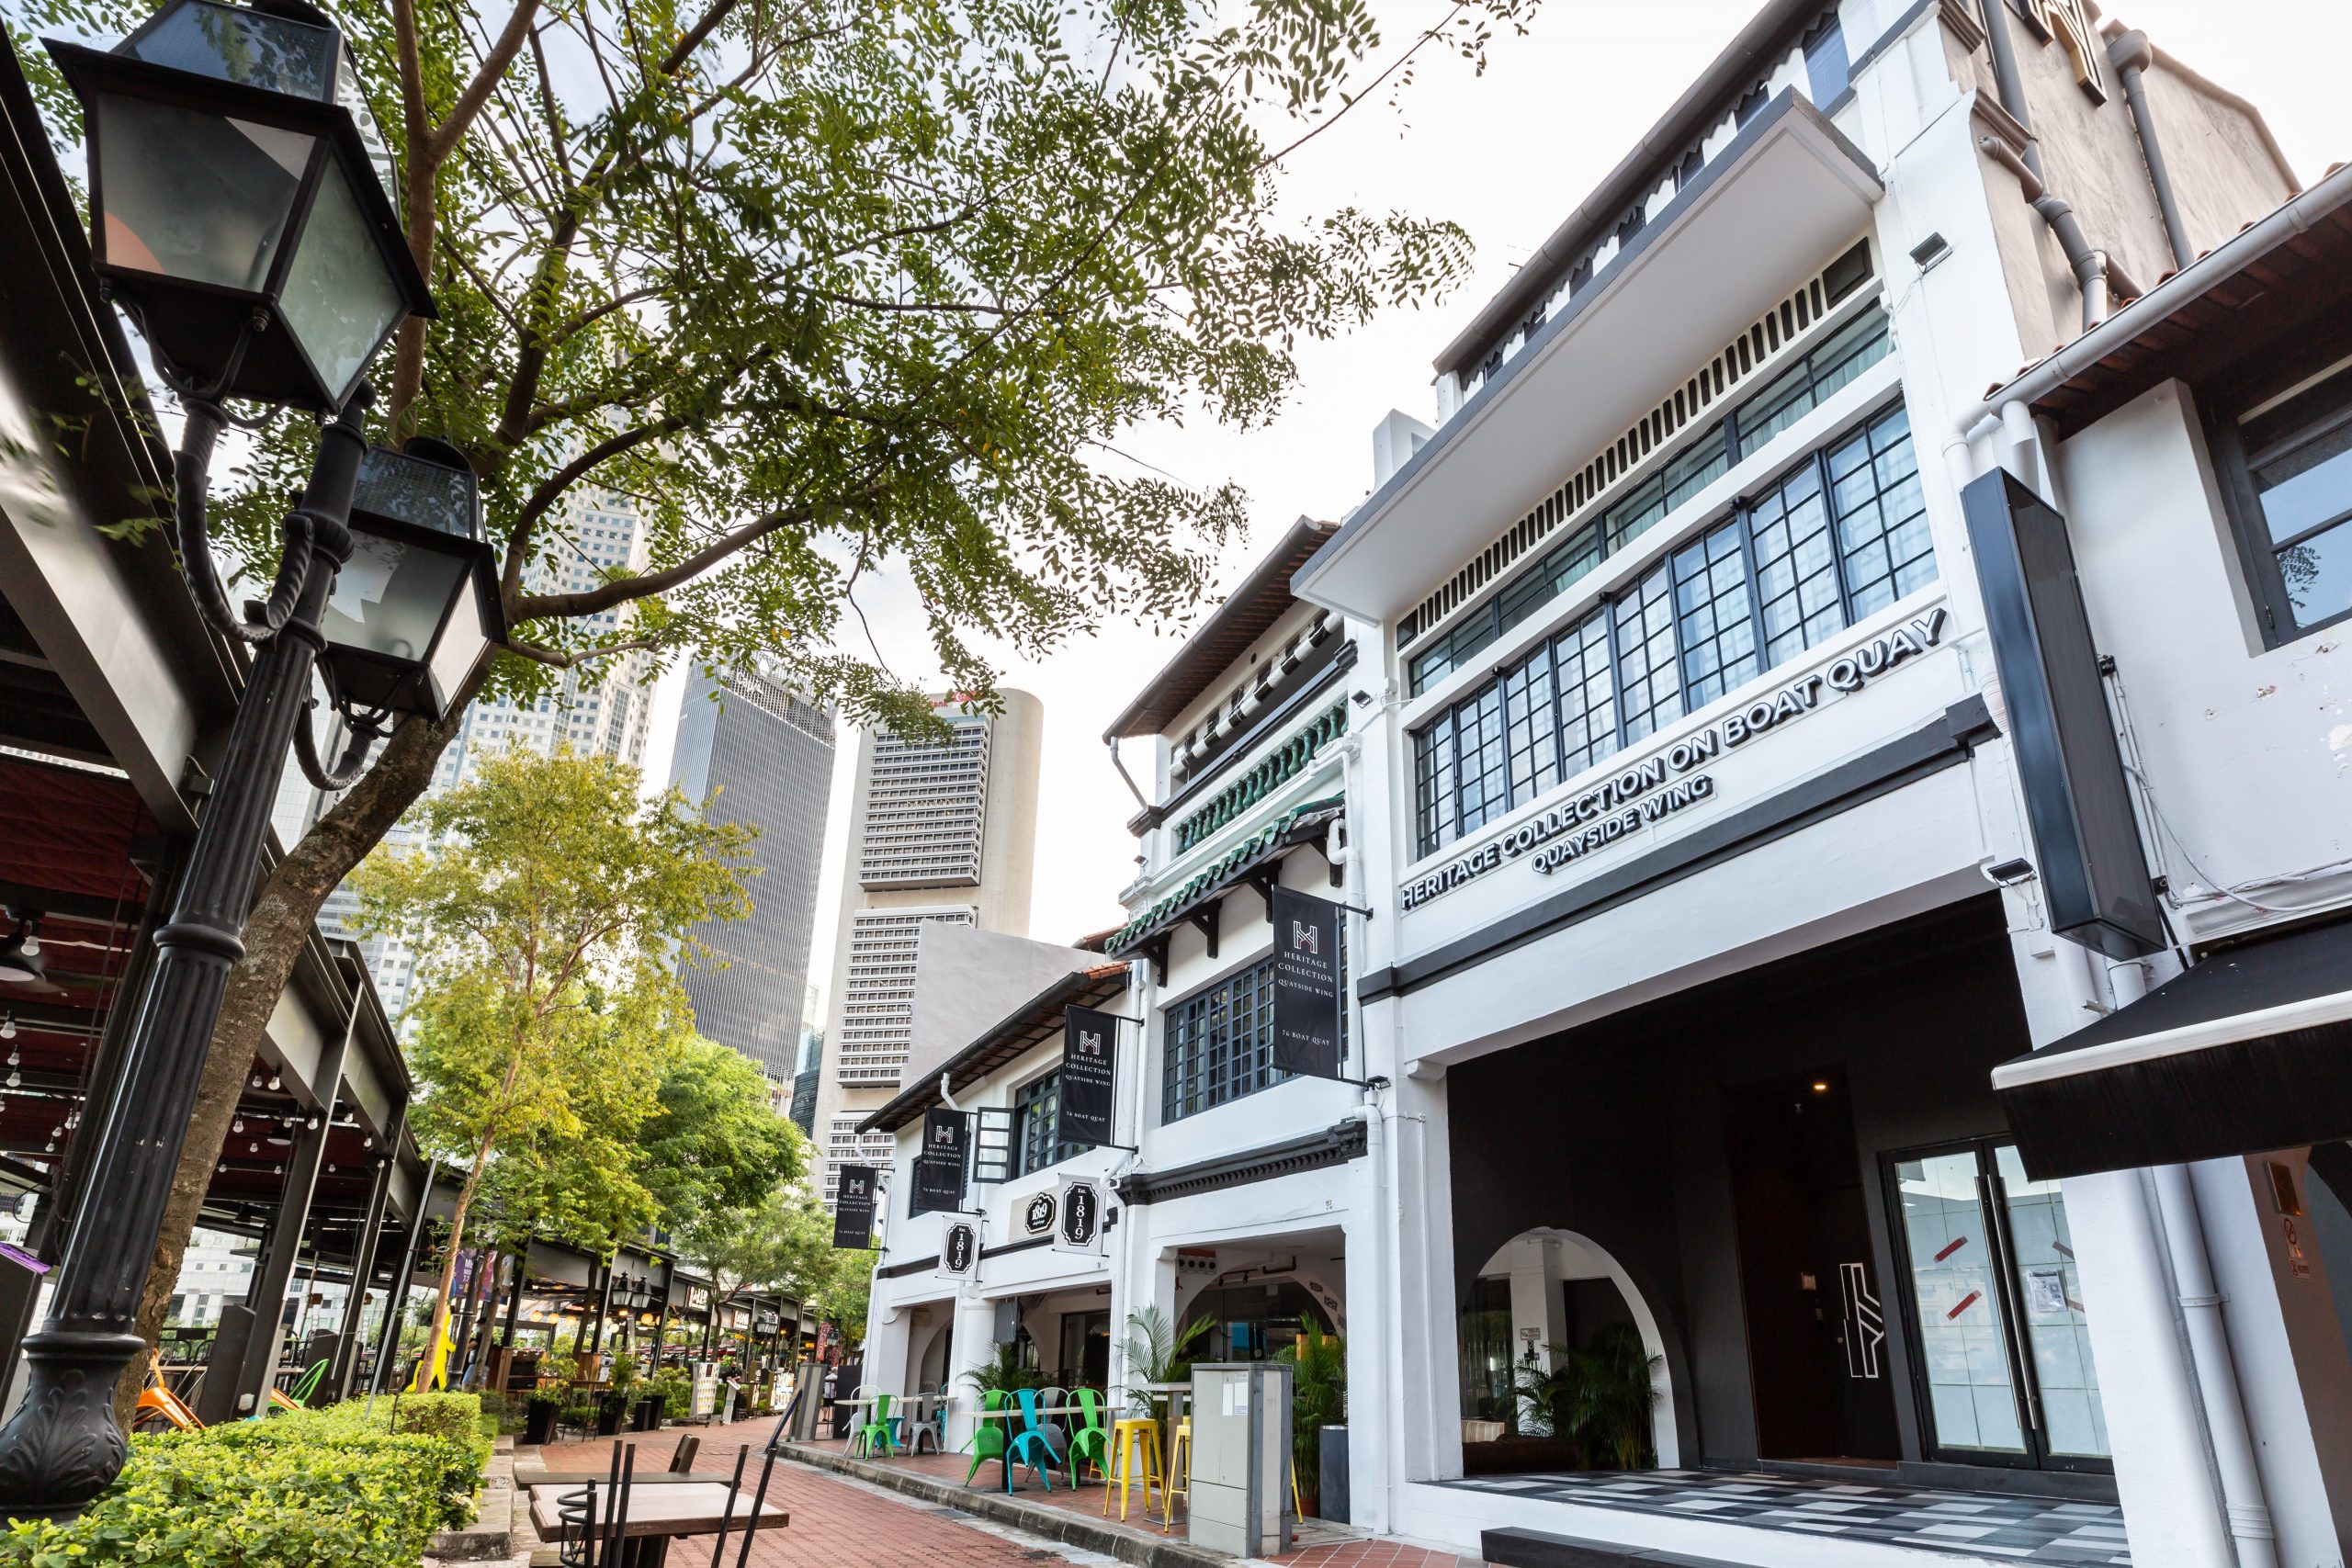 heritage collection on clarke quay